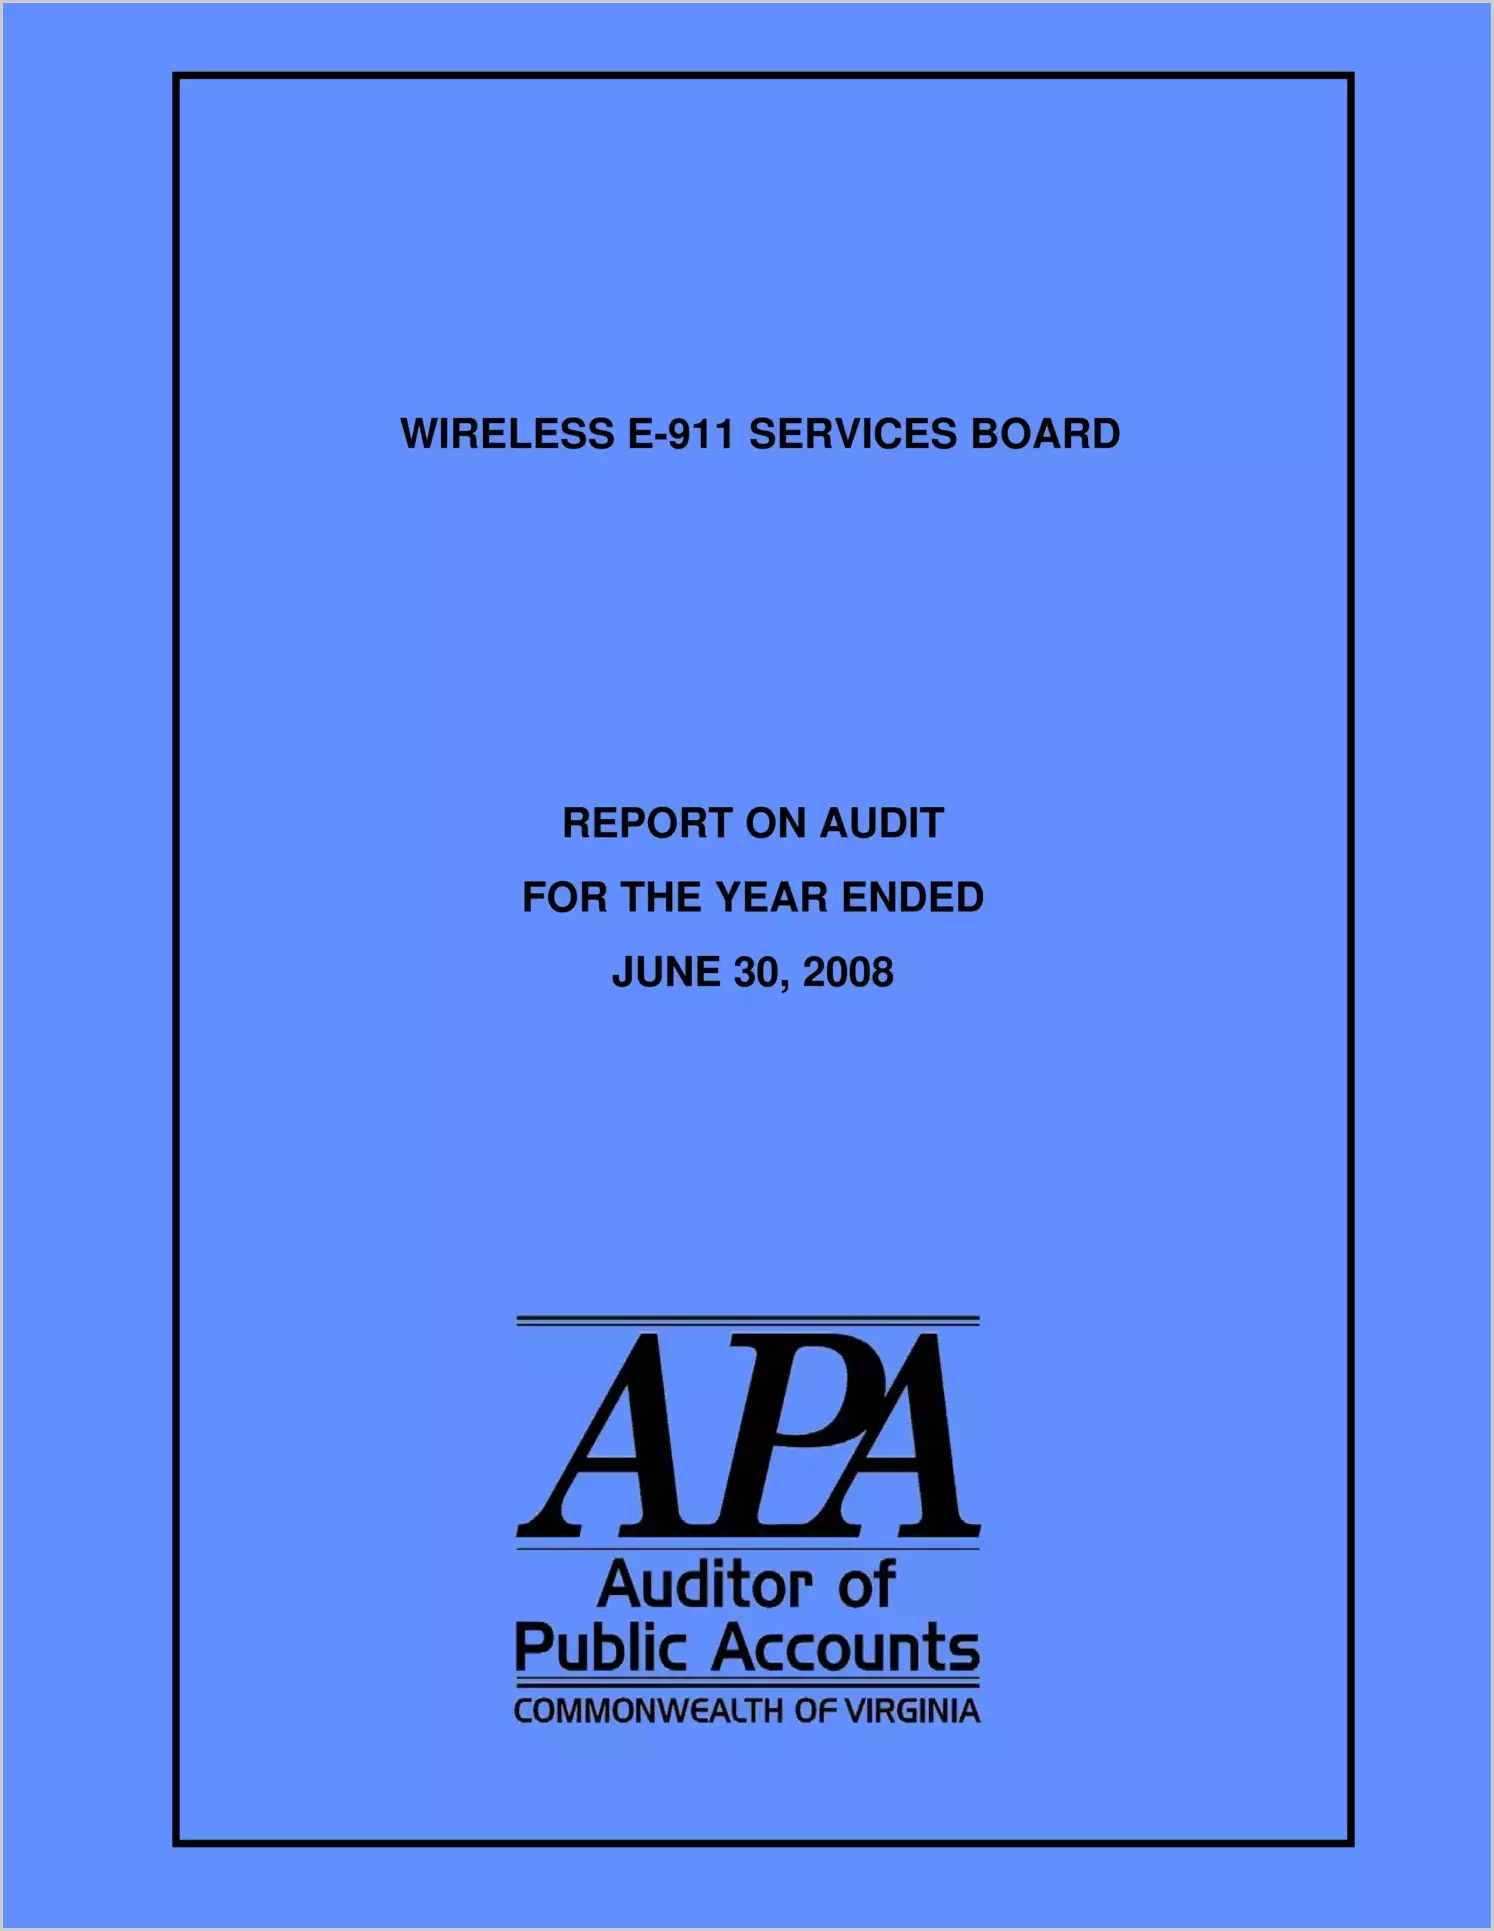 Wireless E-911 Services Board report on audit for the year ended June 30, 2008